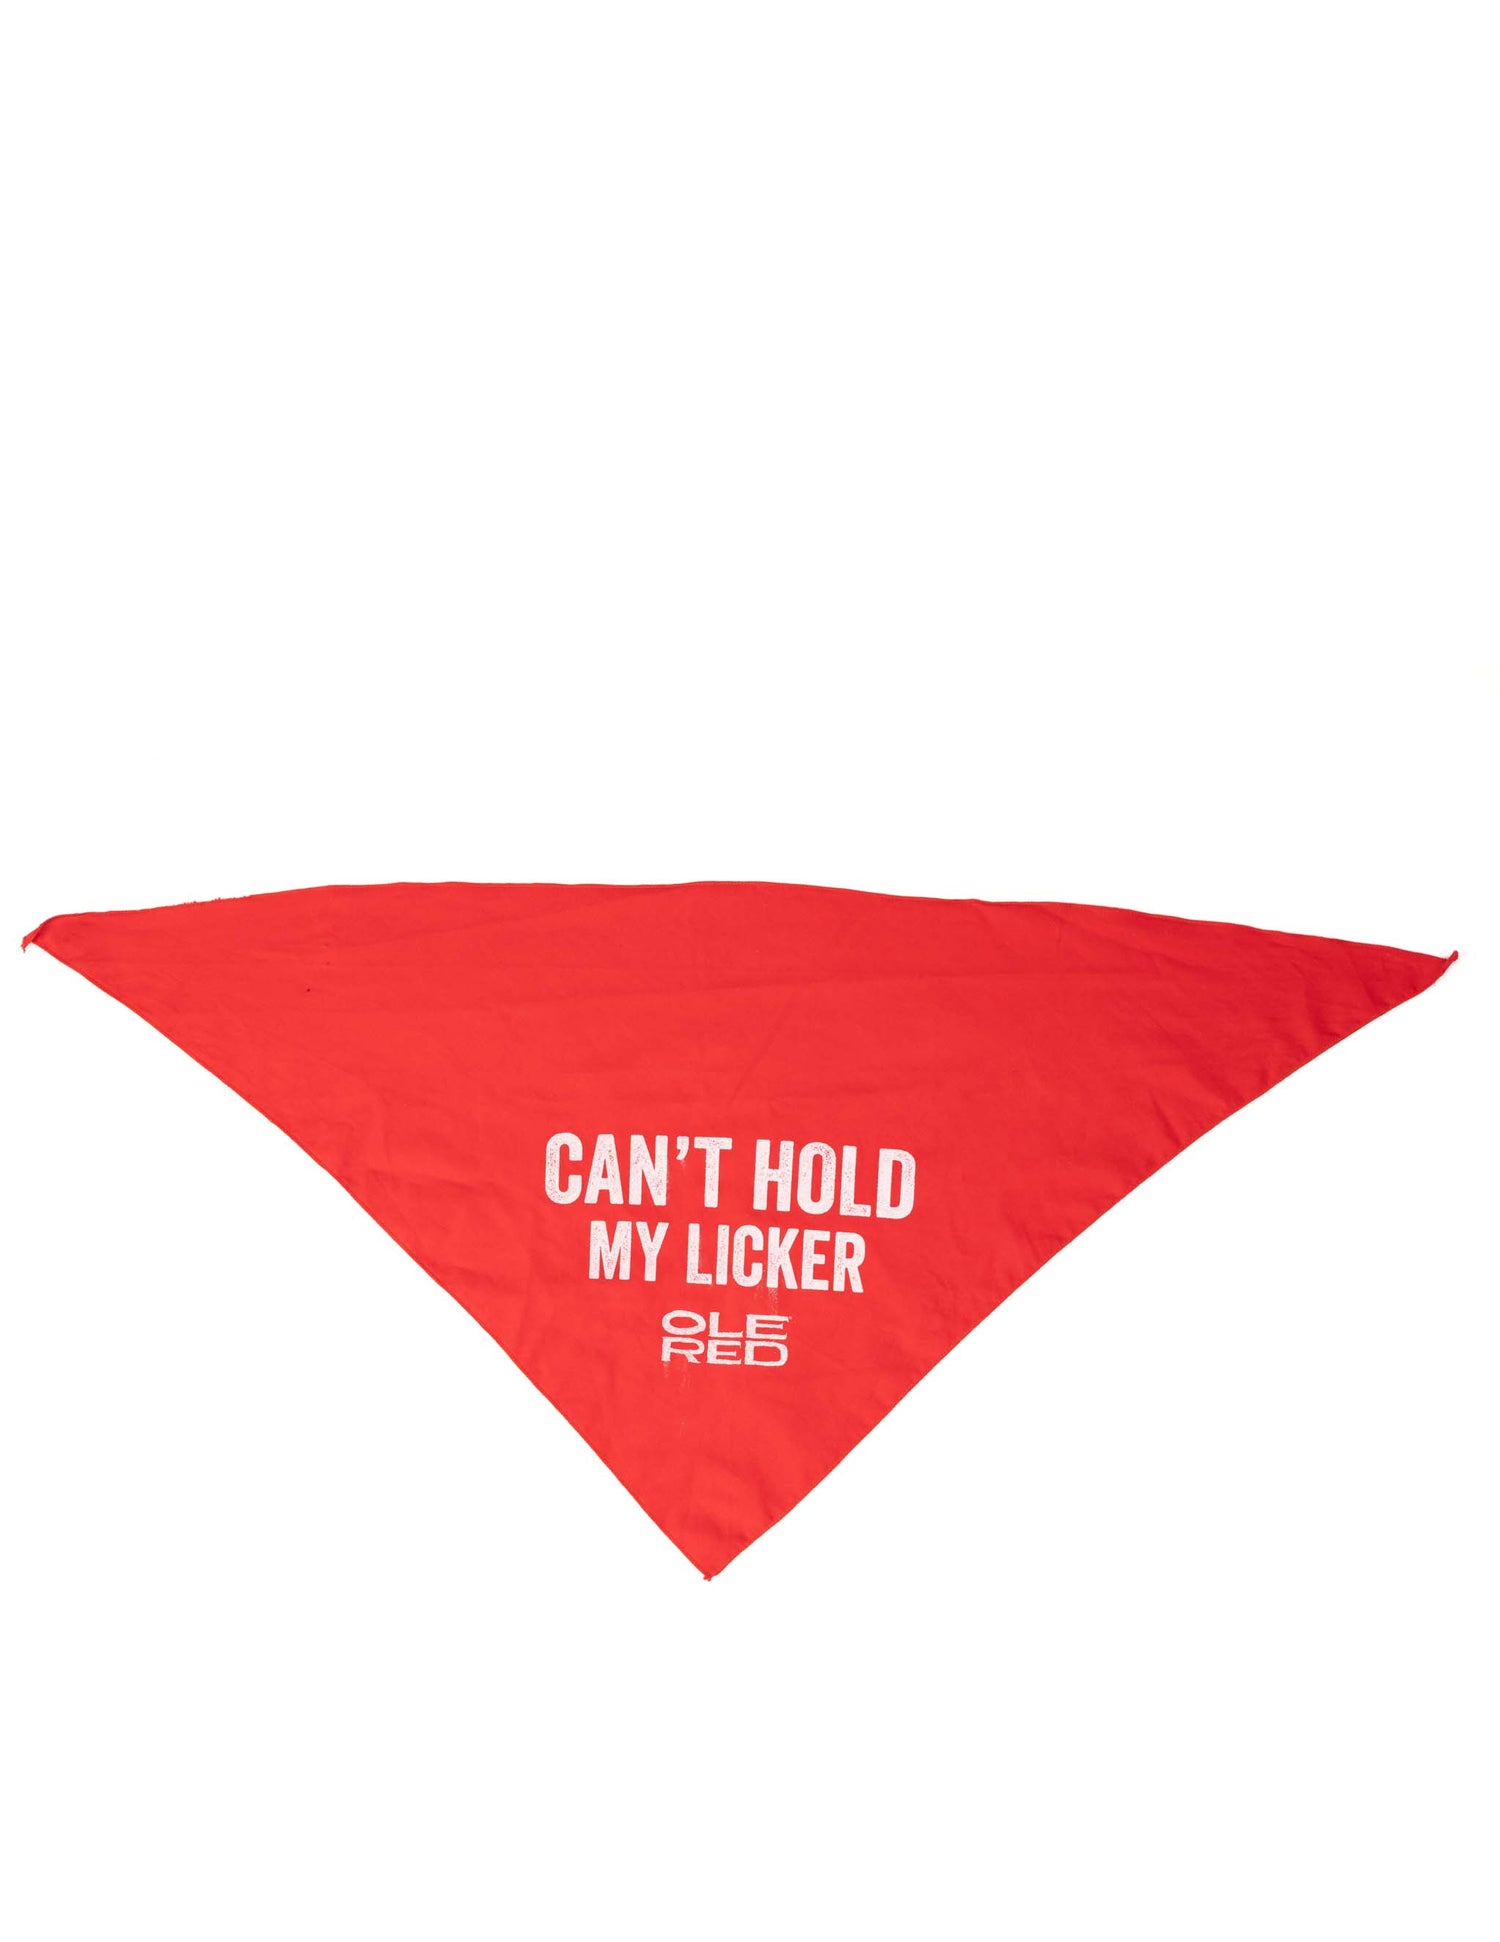 Ole Red Large Dog Bandana - Can't Hold My Licker